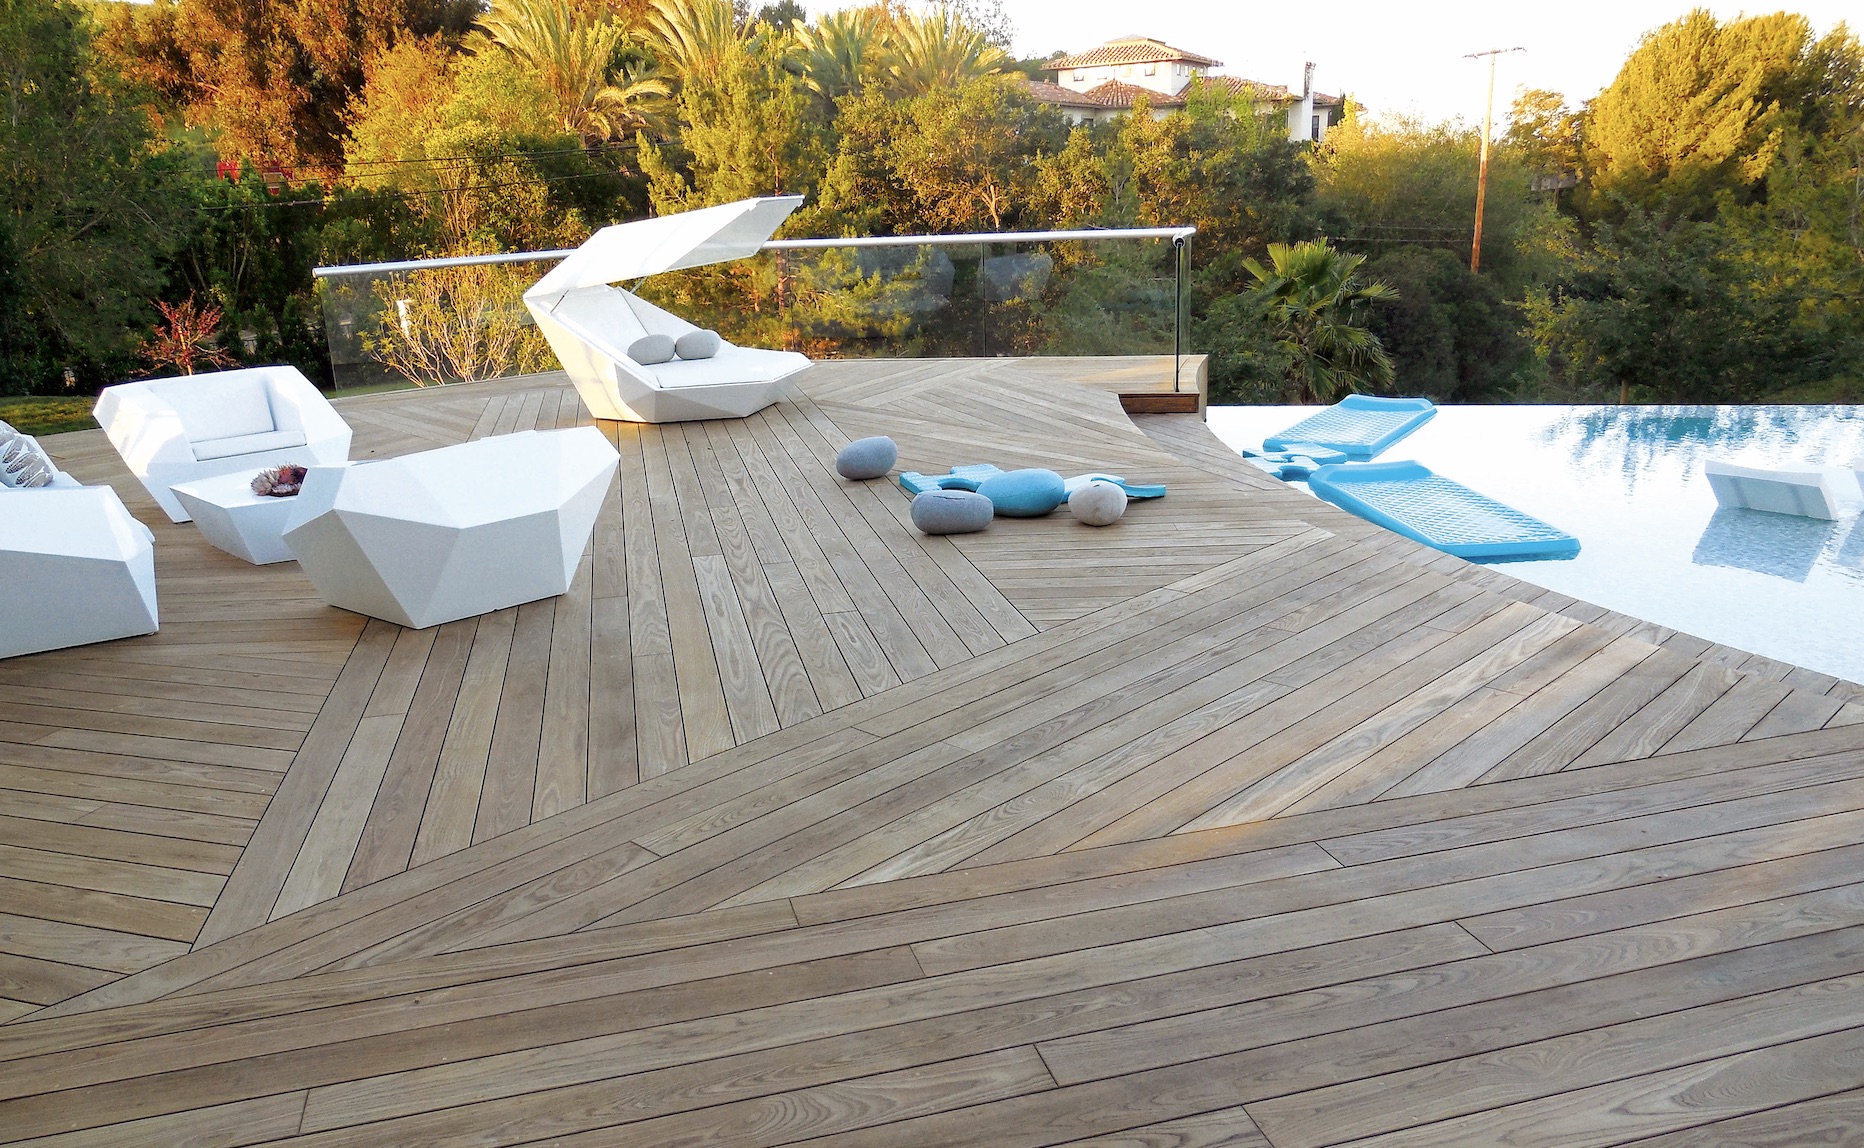 Thermory modified wood ash decking by the pool